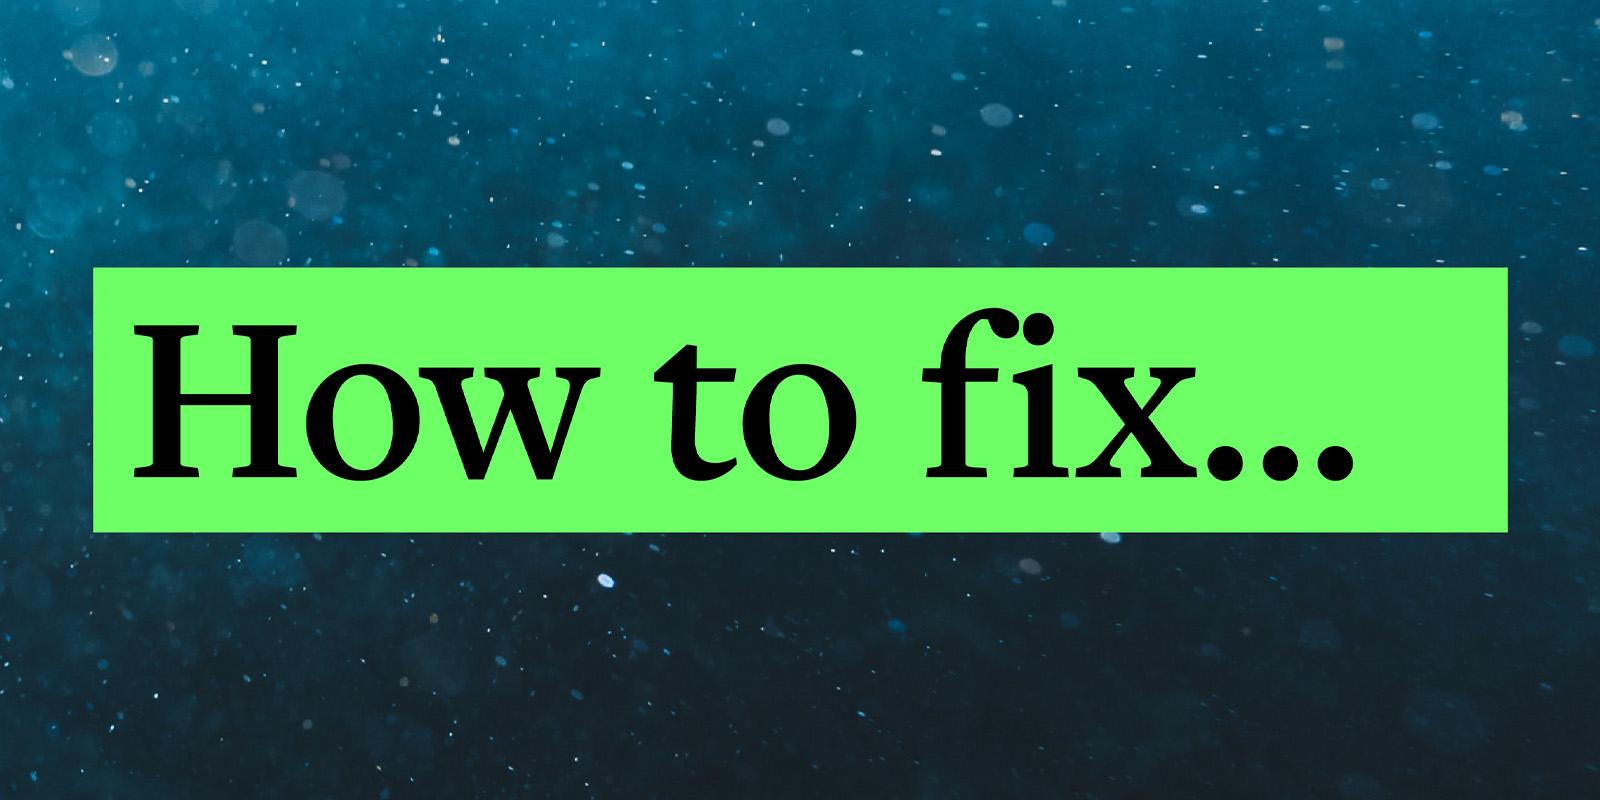 Researchers tackle huge global issues in new podcast series “How to Fix...”